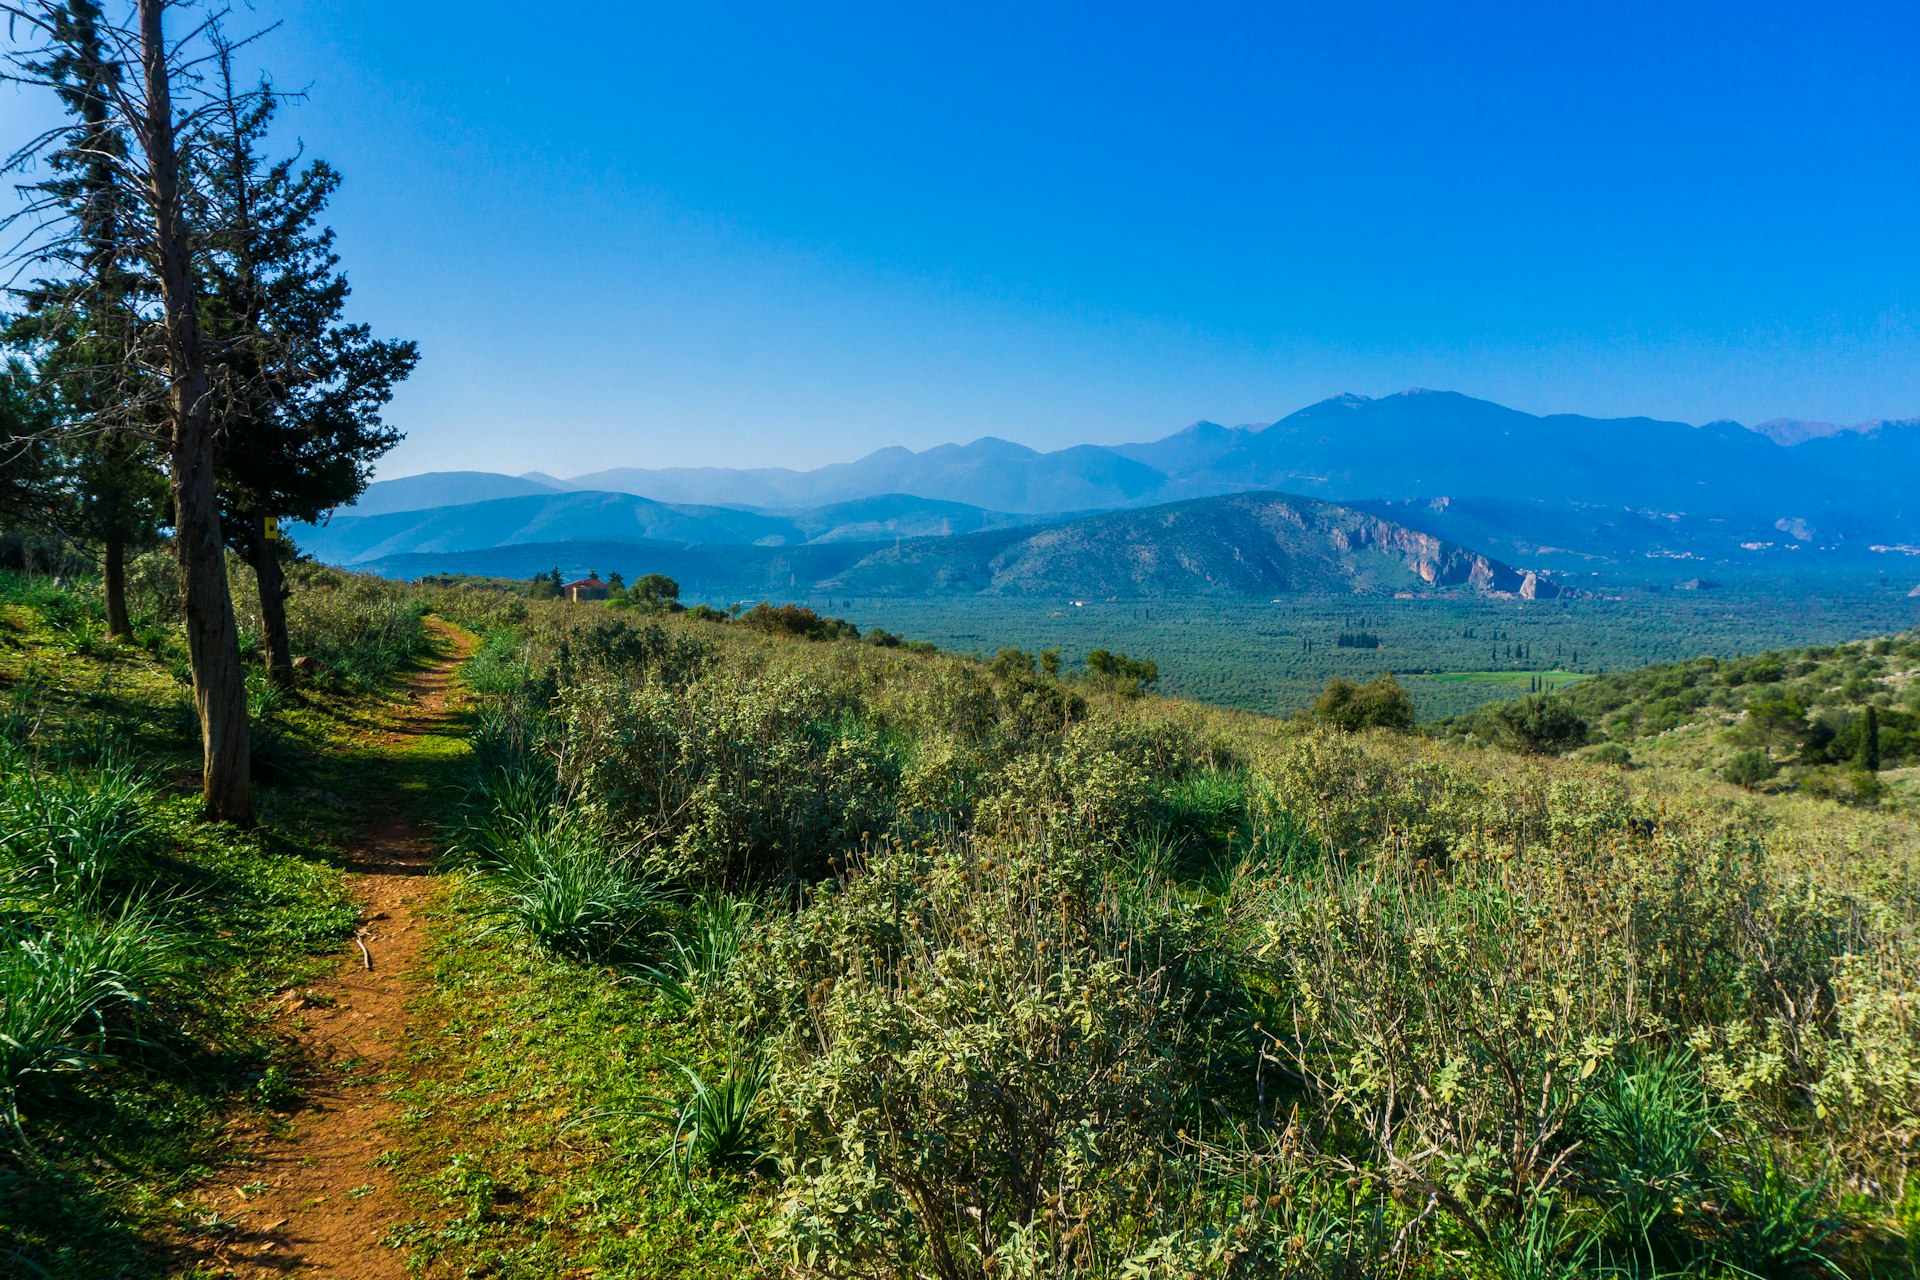 A narrow hiking path heads off into the distance next to a thicket of forest in Parnassos National Park. The track is surrounded by lush vegetation, and in the far distance multiple mountains are visible.